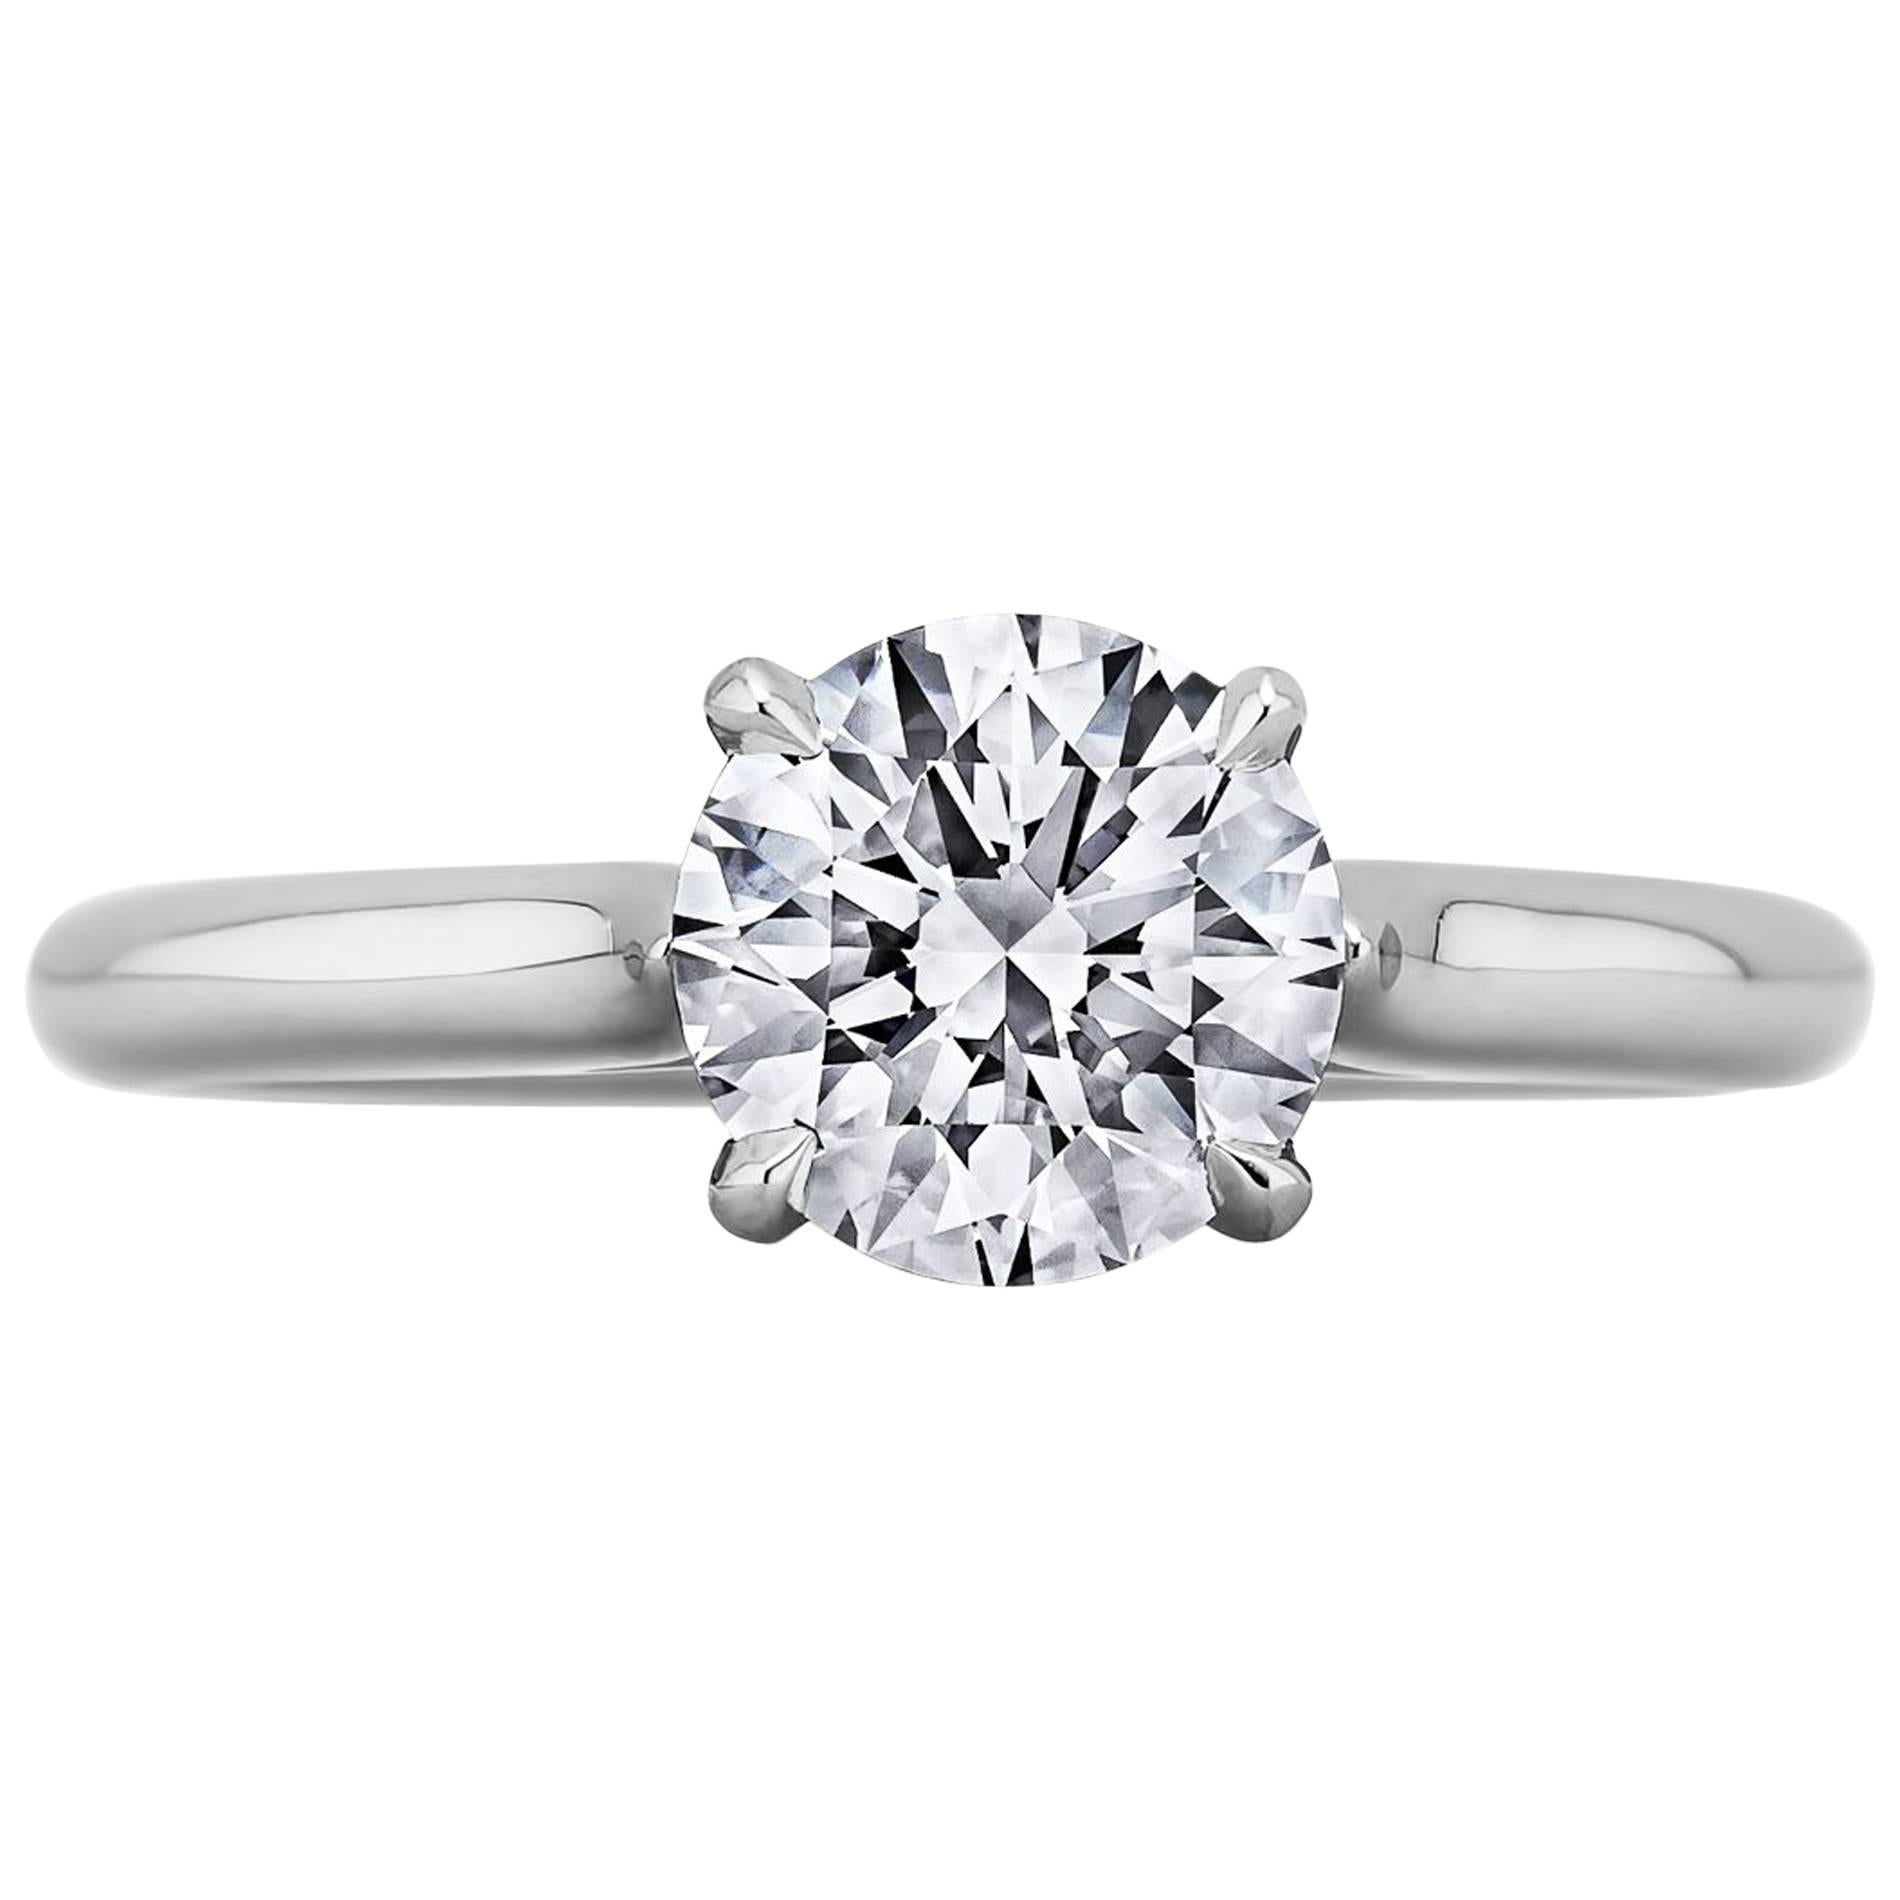 GIA Certified 1.29 Carat Ideal Cut Round Brilliant Diamond Engagement Ring